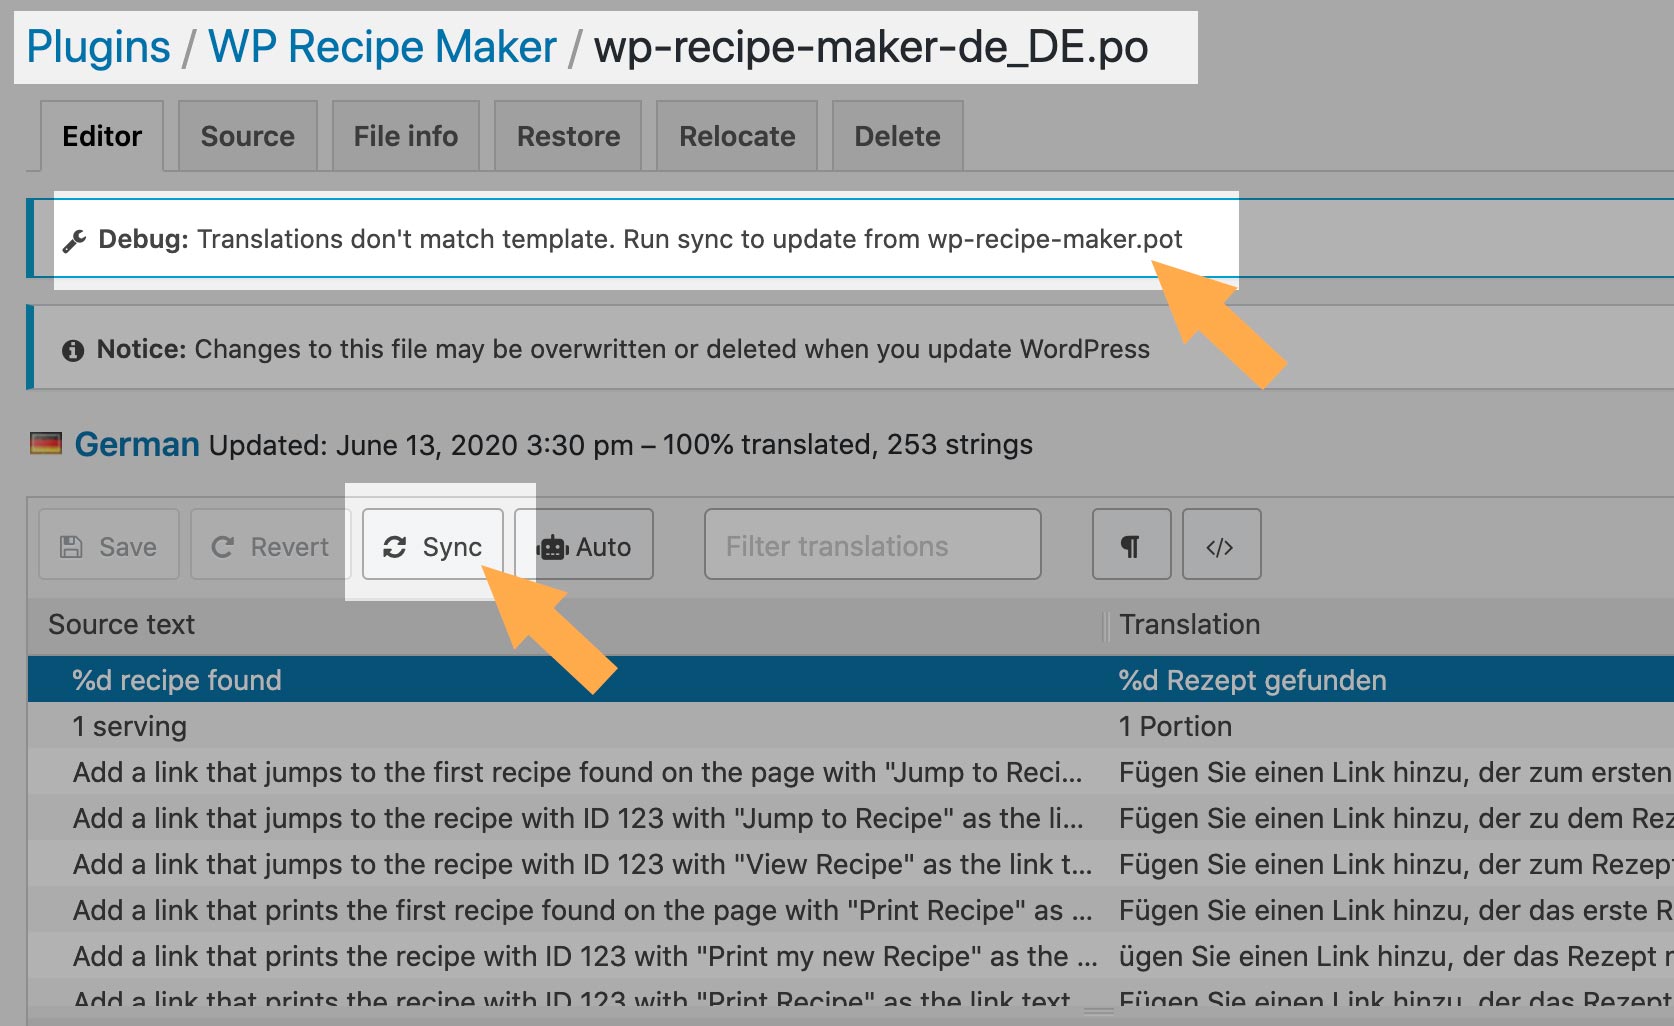 Run sync to update from wp-recipe-maker.pot